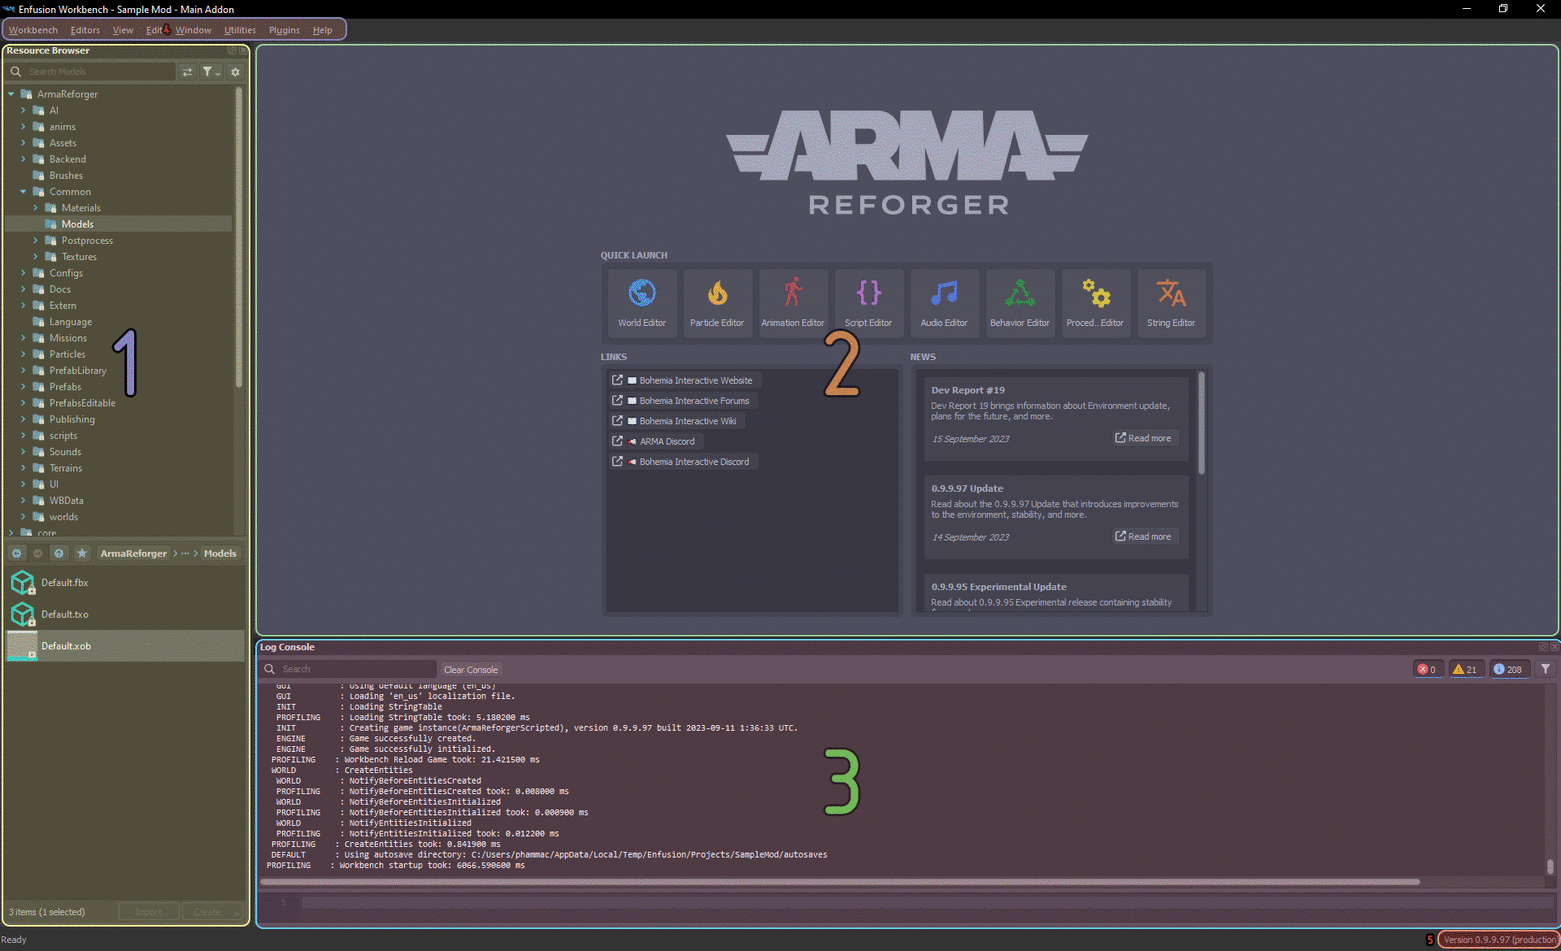 armareforger-resource-manager-main-view.gif